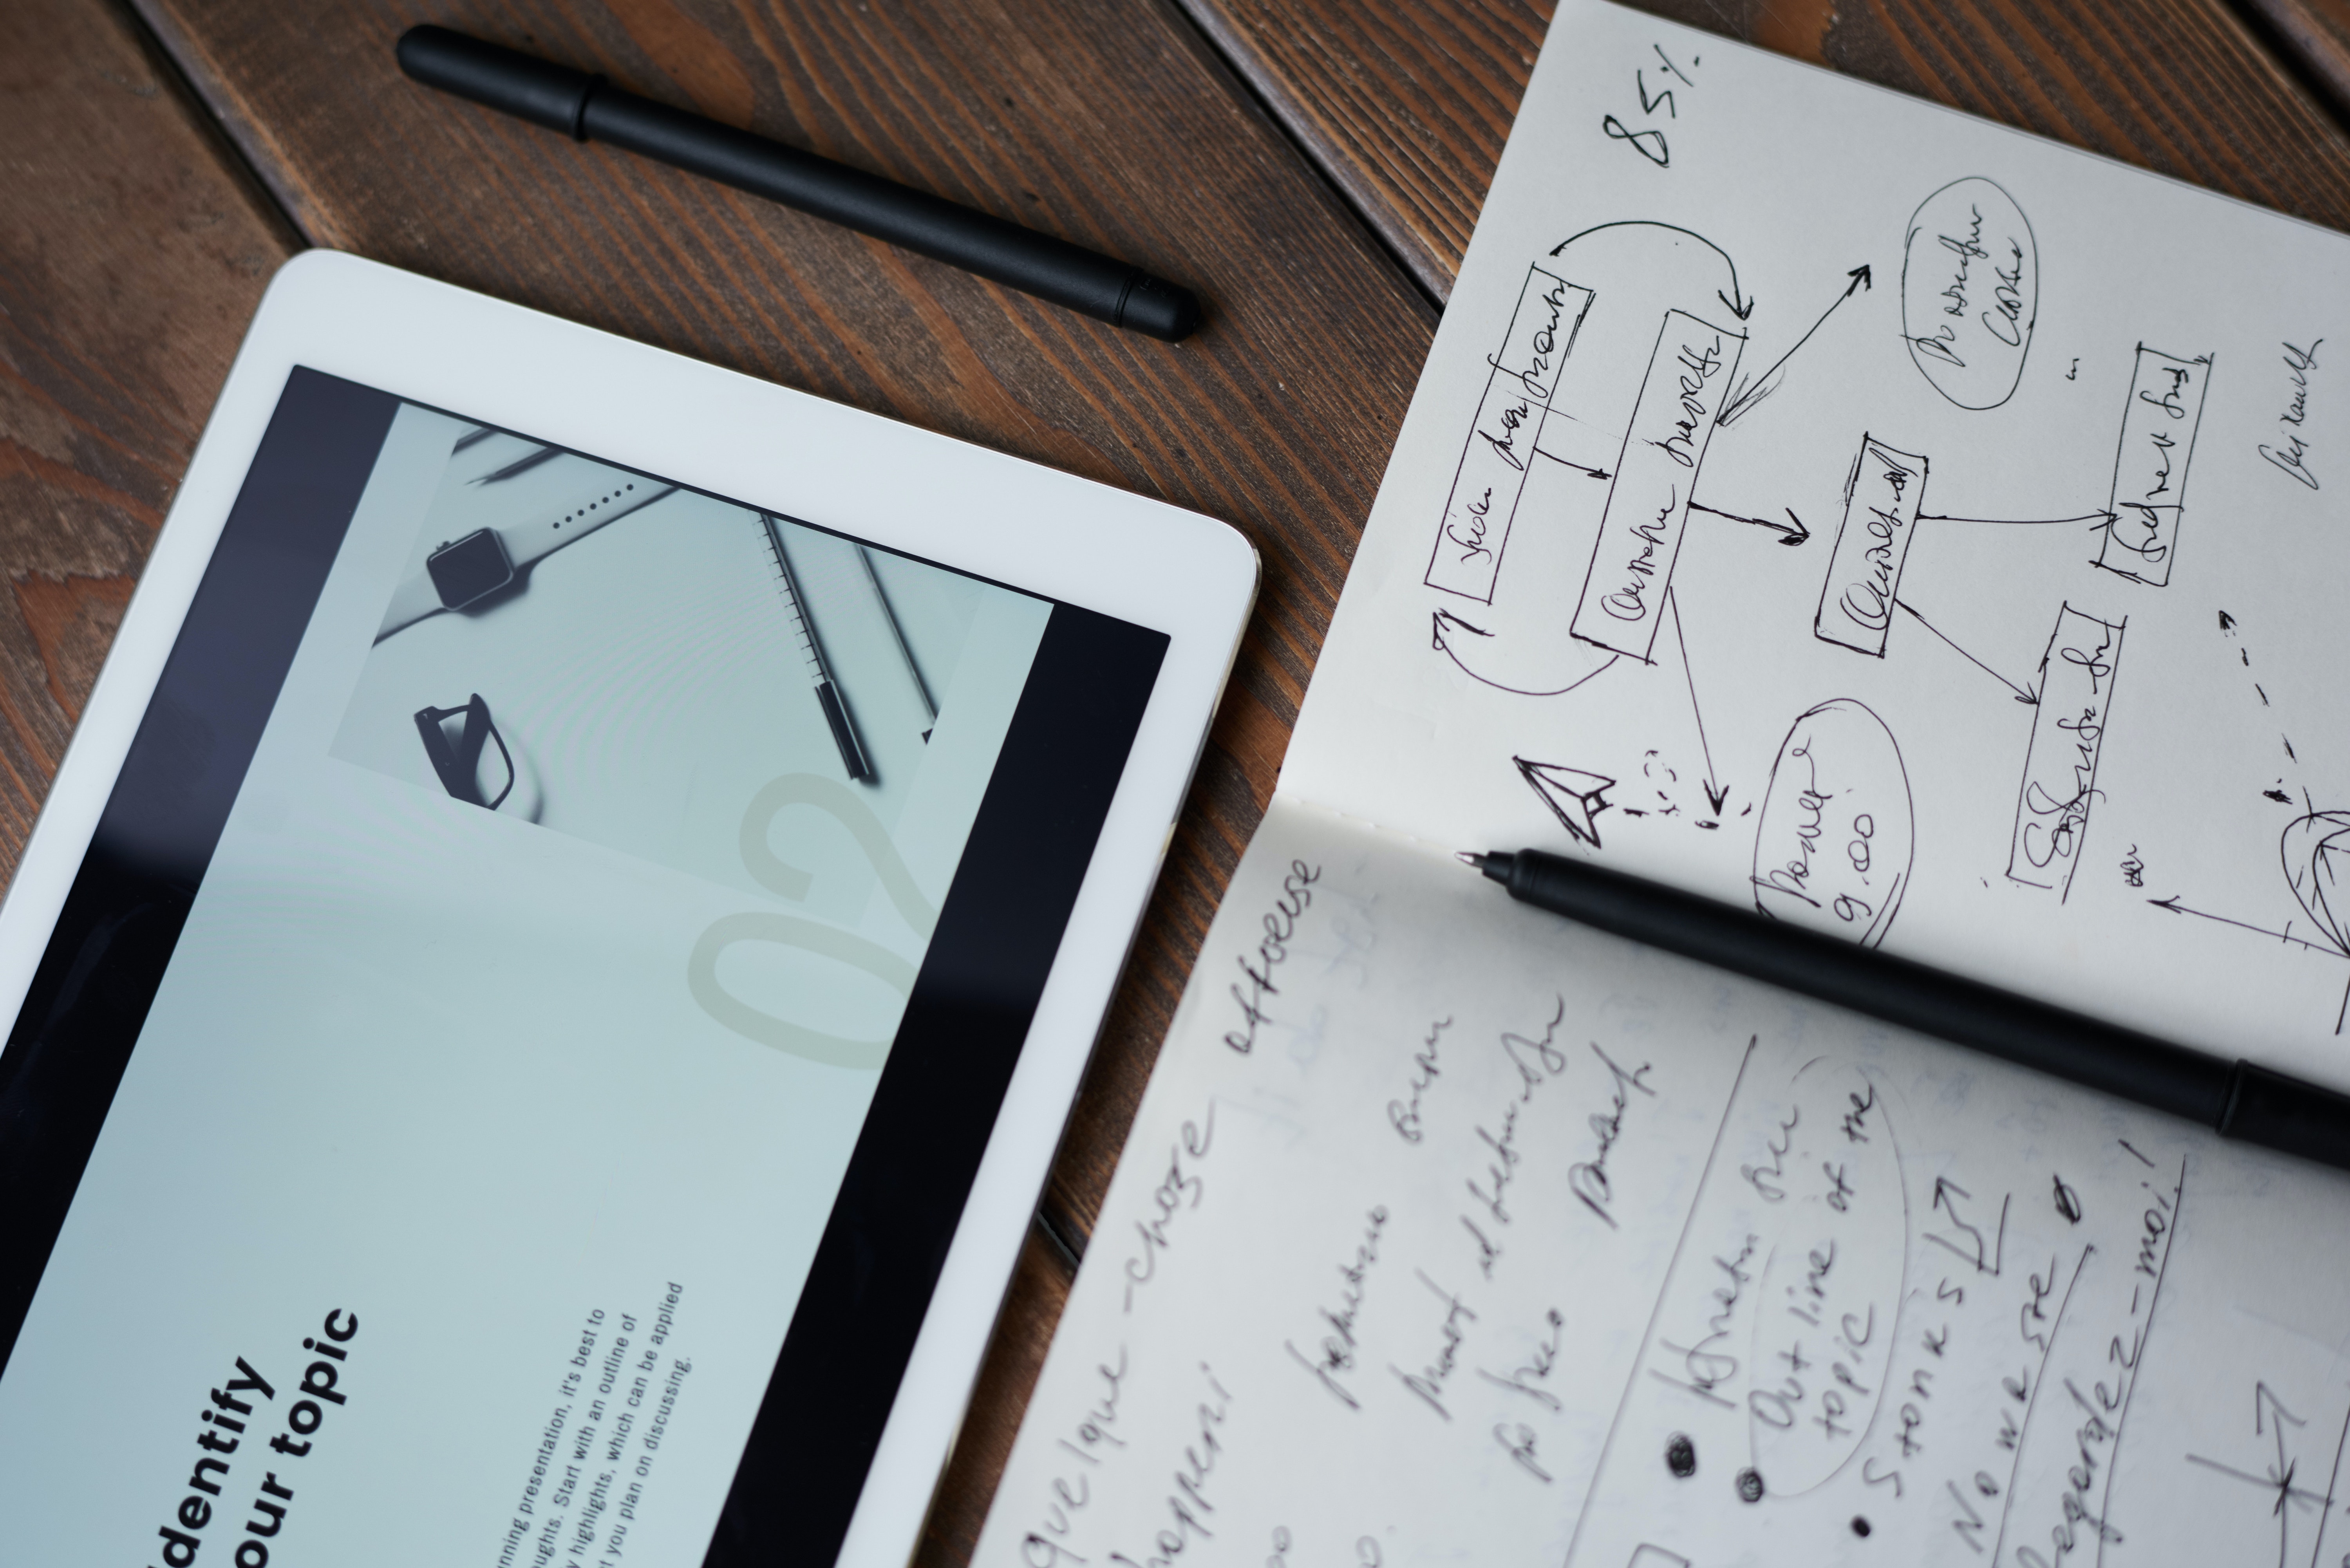 A tablet and a notebook. On it, there's a map of content structure drawn. Indicating that content structure is important when you decide to redesign your website.